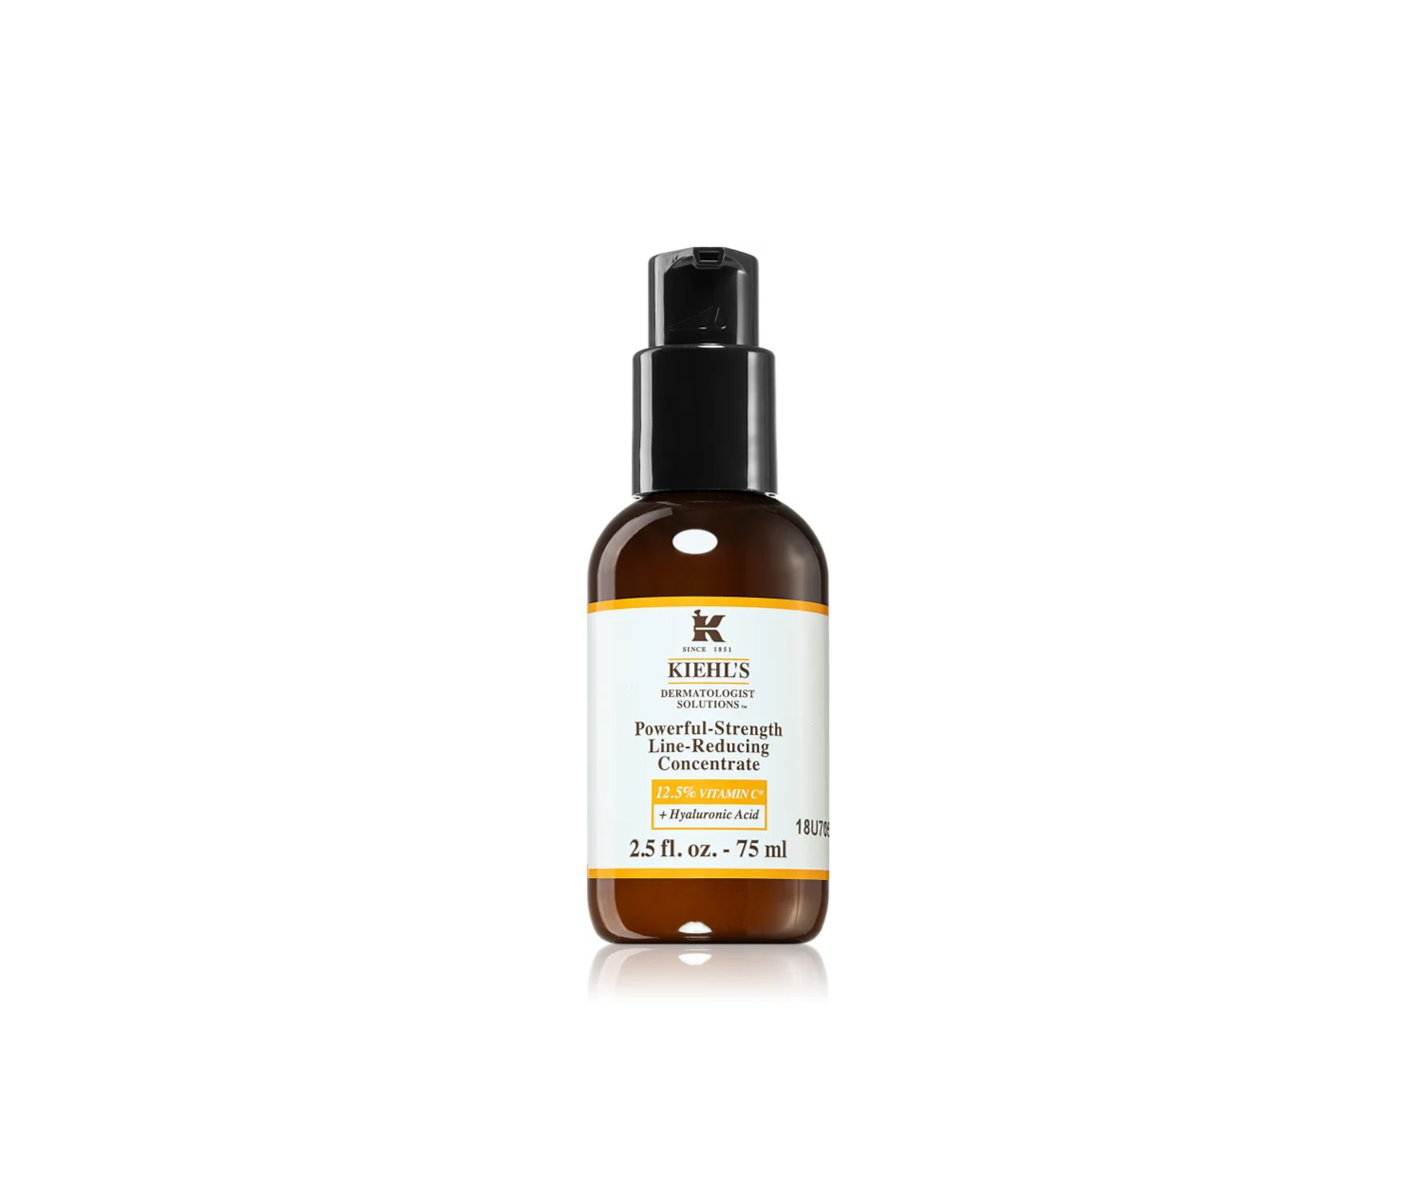 Kiehl's, Dermatologist Solutions Powerful-Strength Line-Reducing Concentrate, Serum for broken capillaries